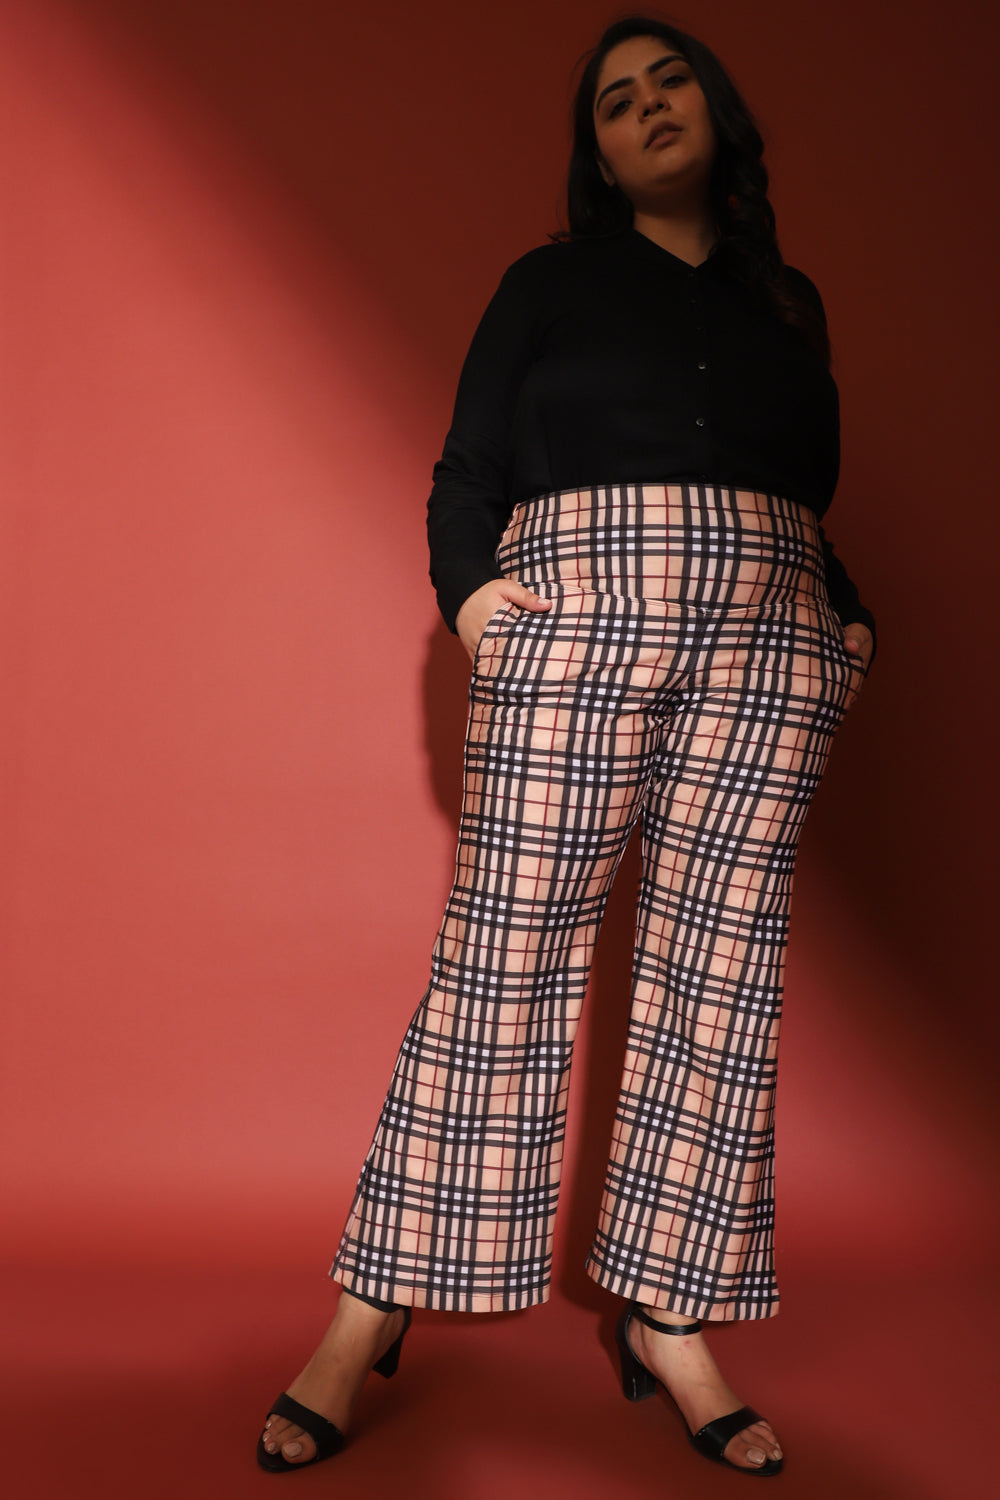 Cairo flare bootcut pants & trousers for women casual and office wear.